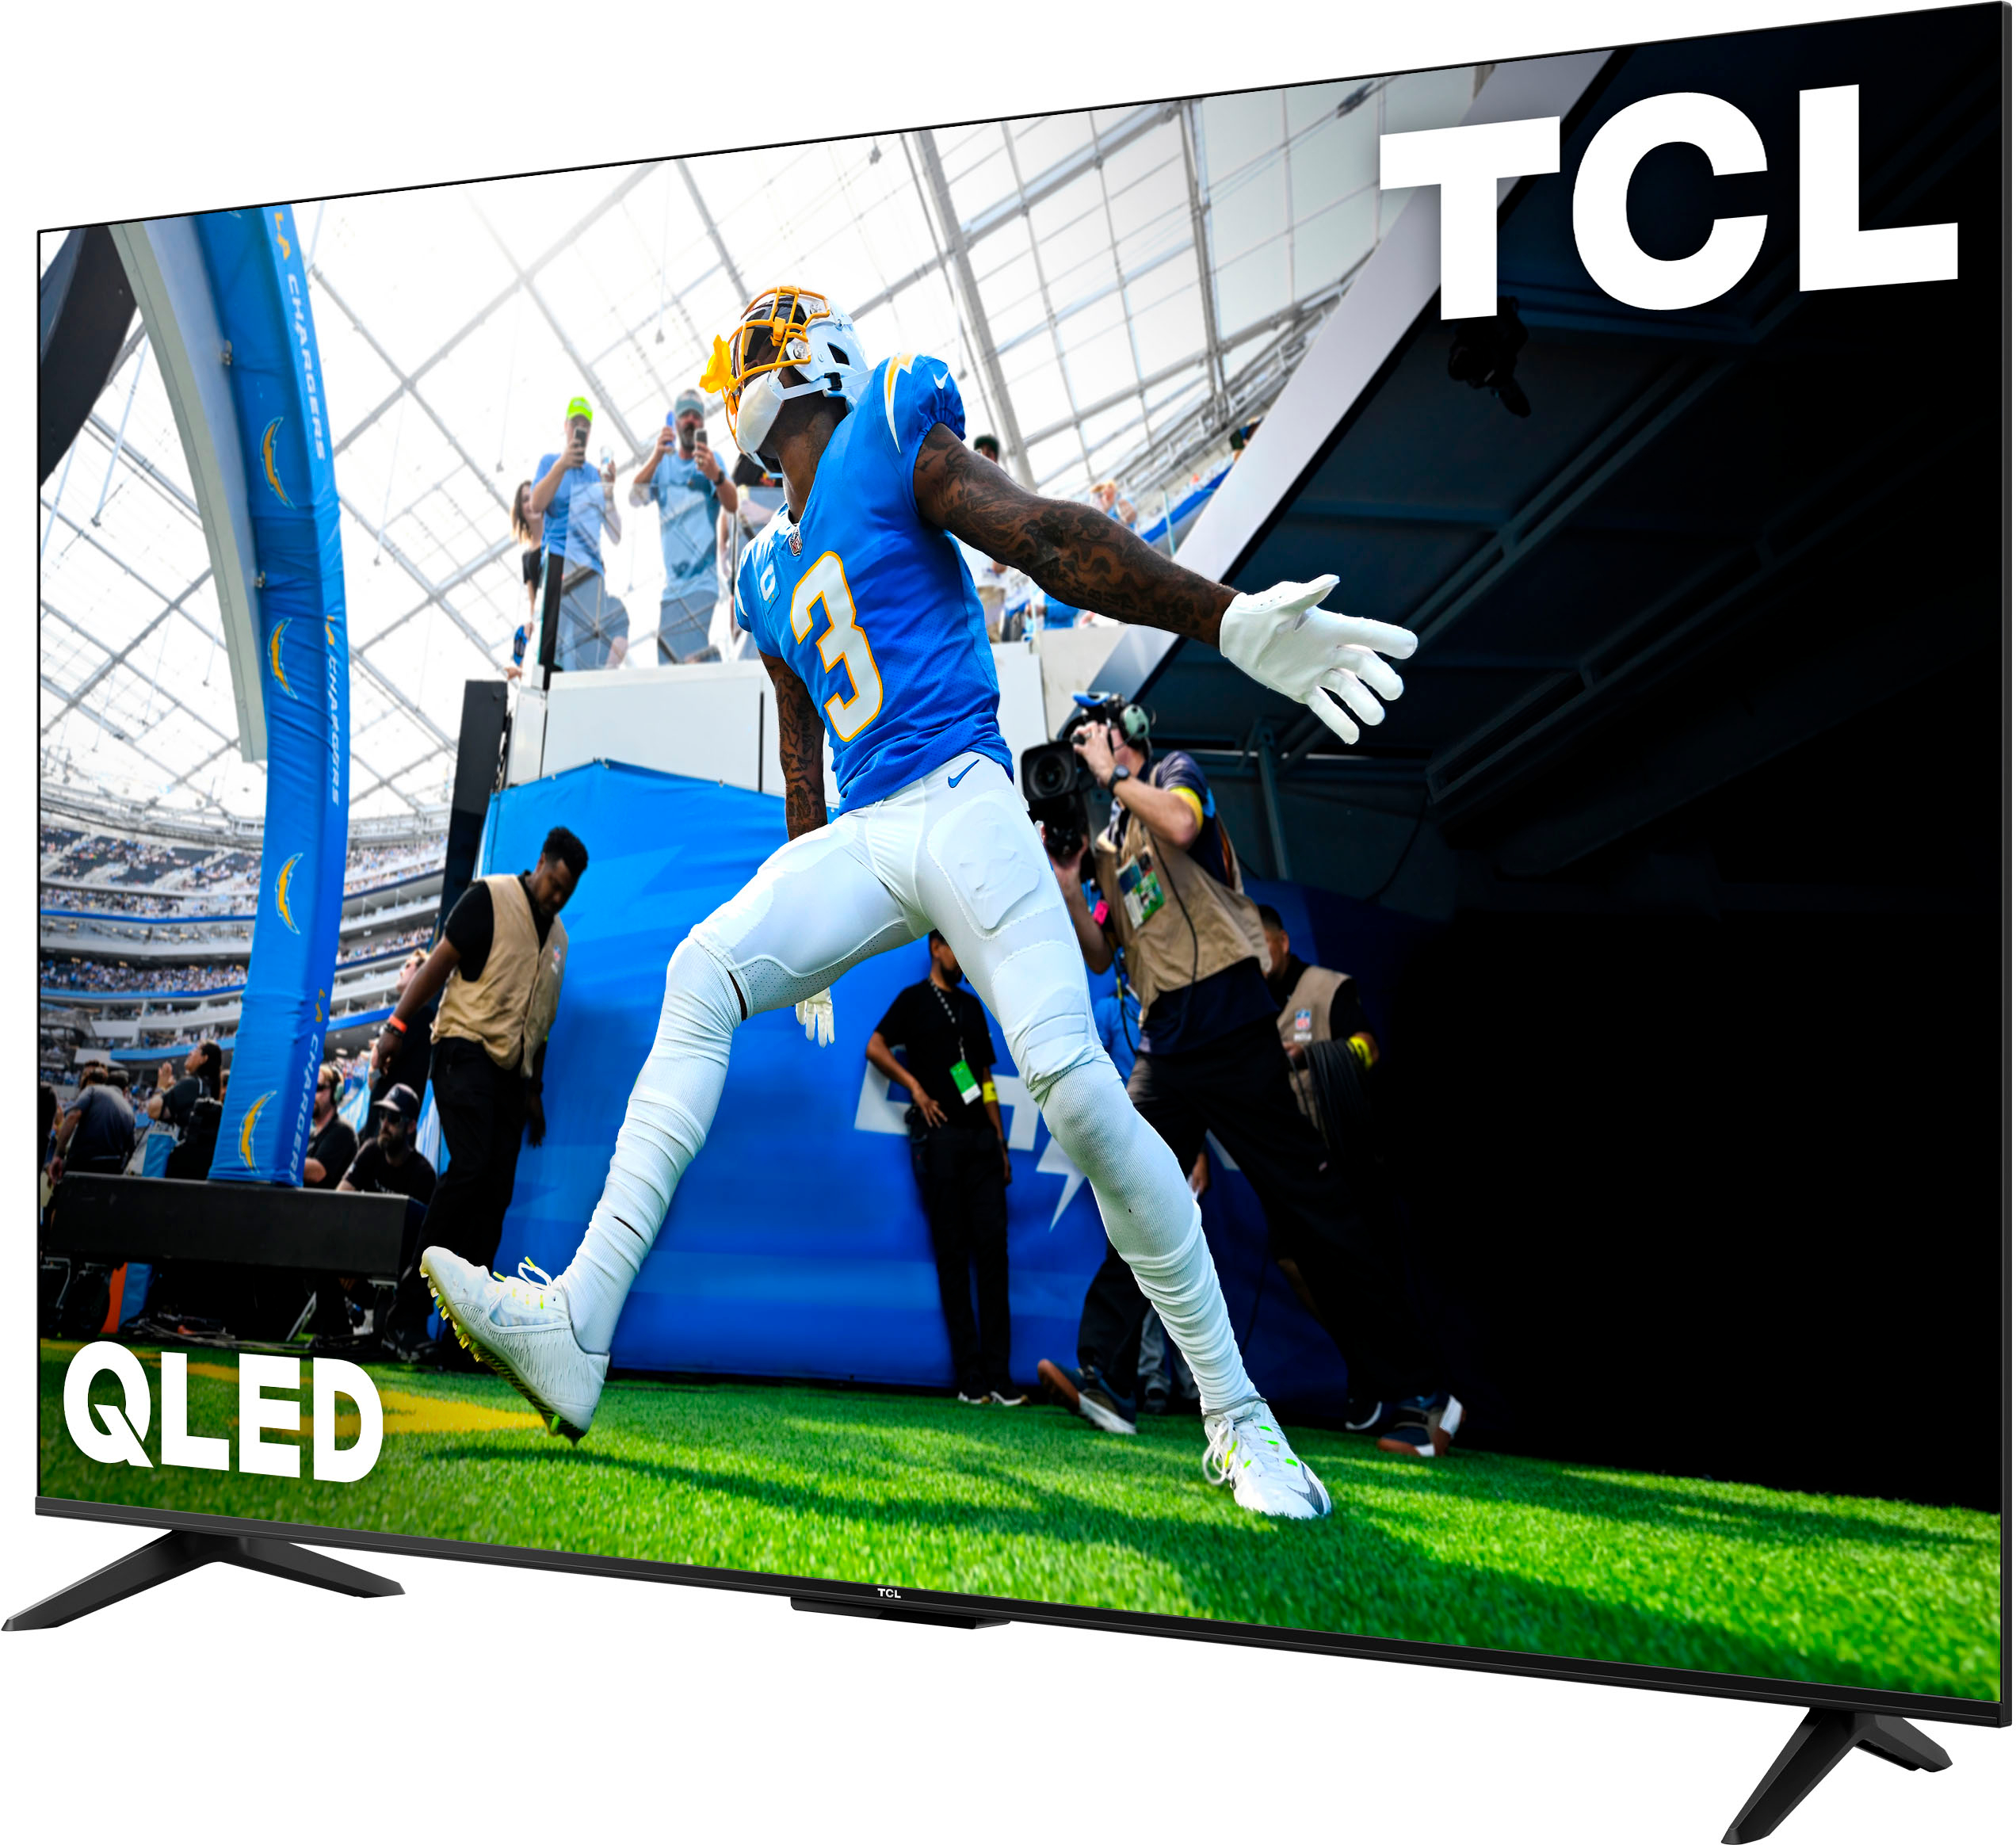 Left View: TCL - 65" Class Q5 Q-Class 4K QLED HDR Smart TV with Google TV